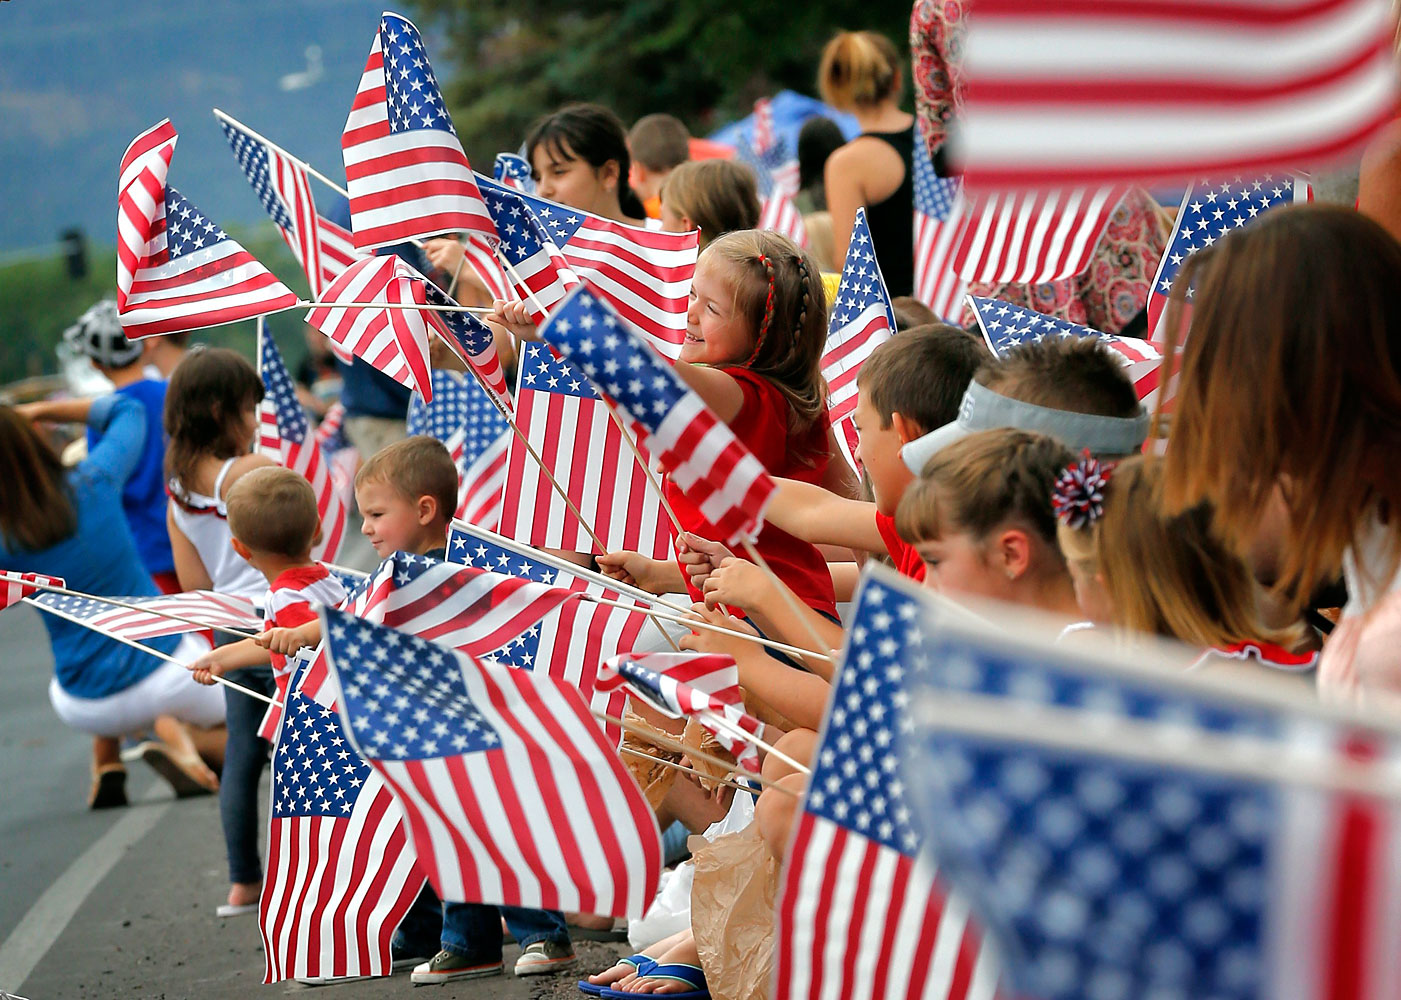 People wave flags as the Independence Day parade rolls down Main Street, July 4, 2014, in Eagar, Ariz.